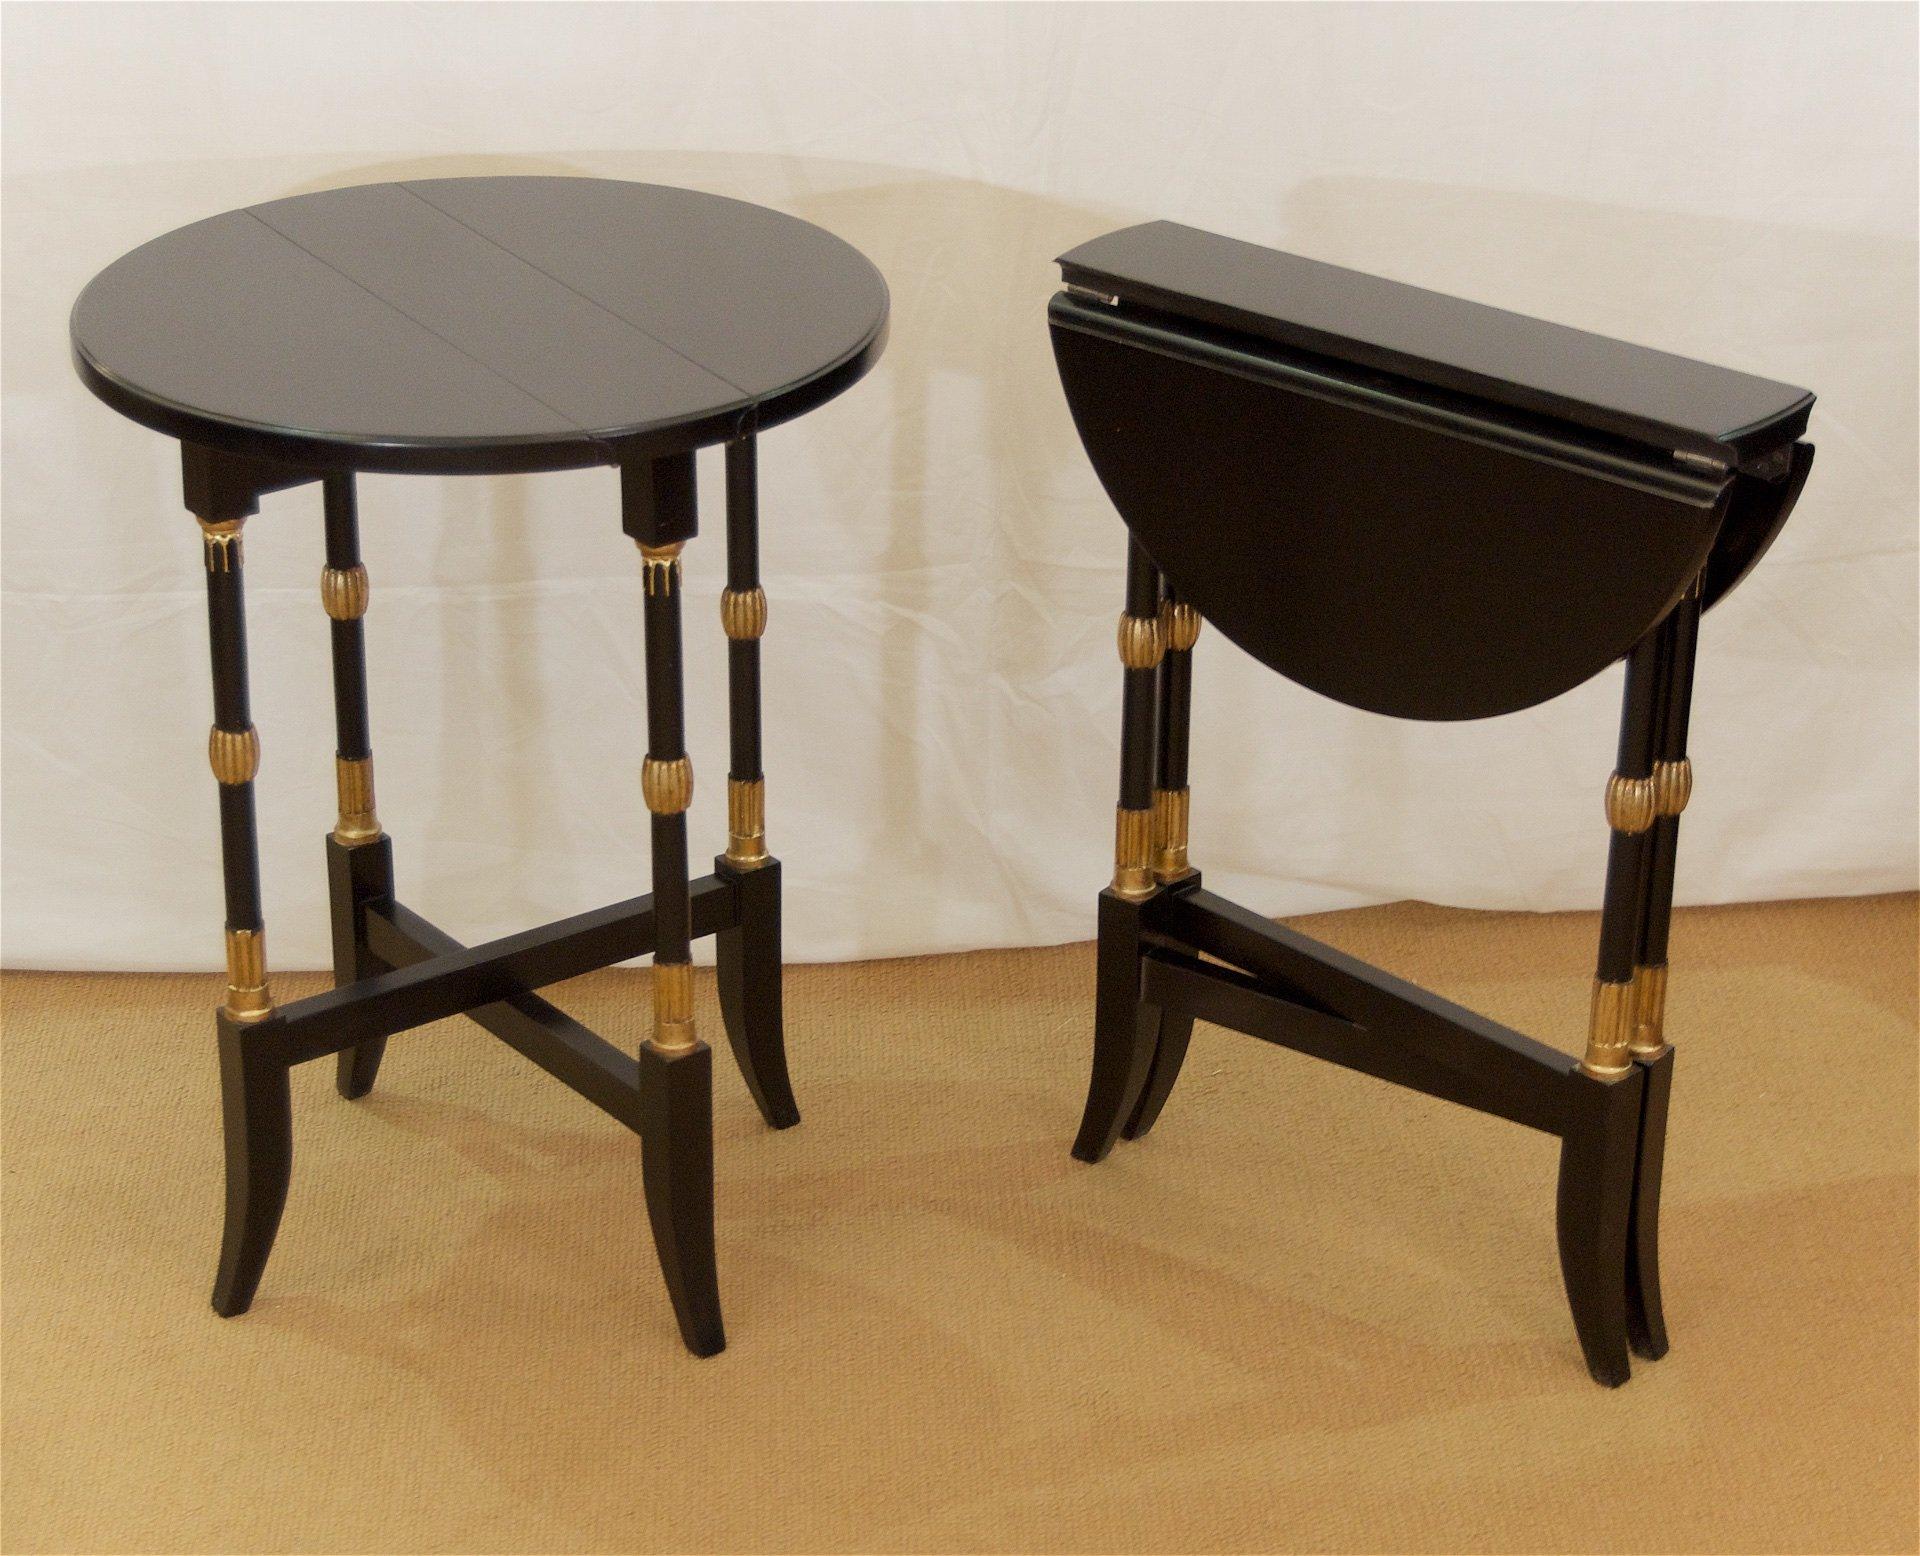 American Black Lacquer Regency-Style Folding Occasional Tables from the Fontainebleau For Sale